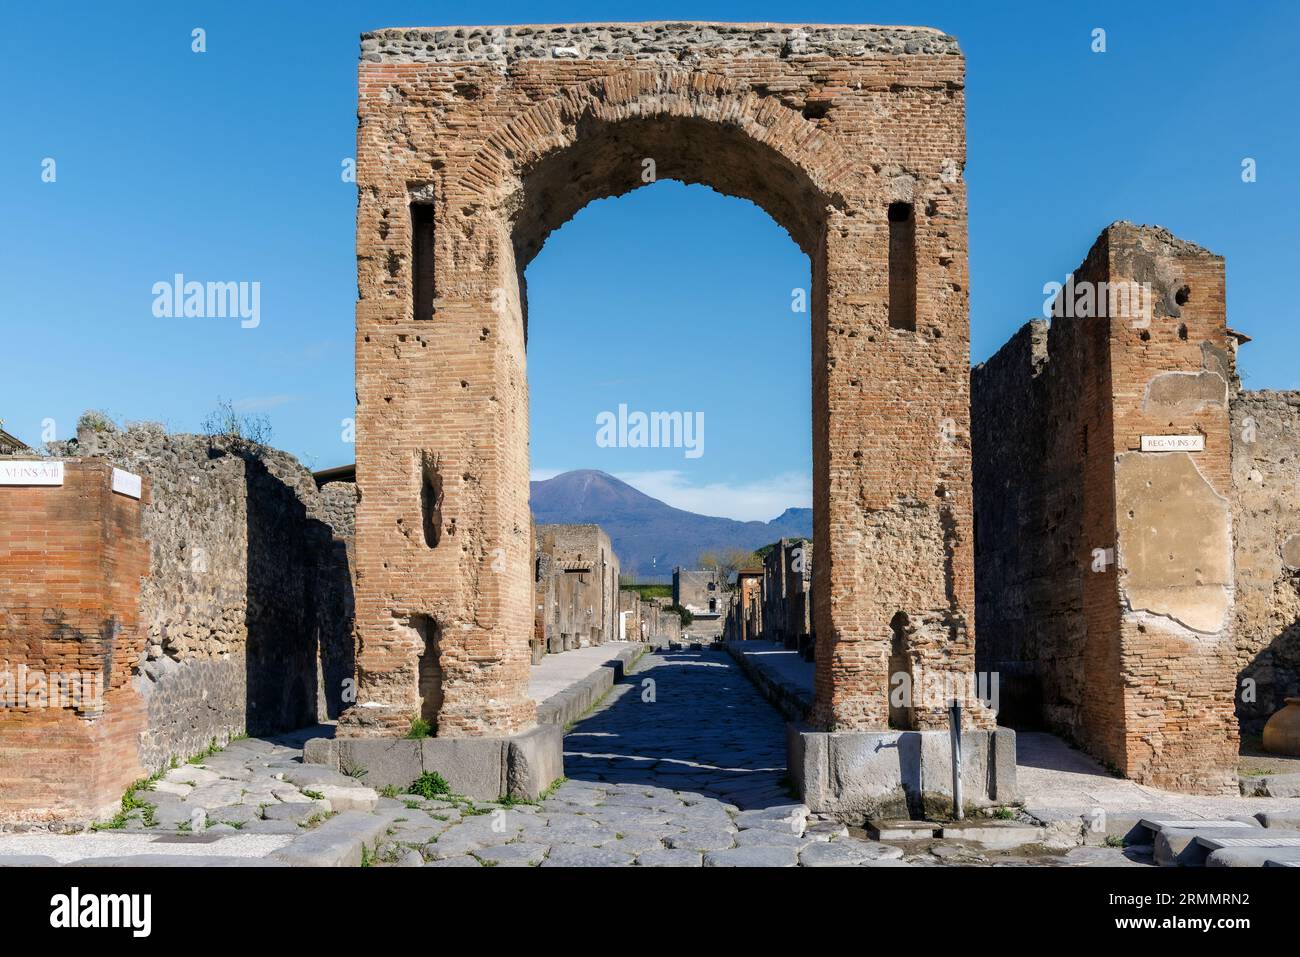 Pompeii Archaeological Site, Campania, Italy.  Arch of Caligula is the current name.  It has been variously known as the Arch of Tiberius, the Arch of Stock Photo